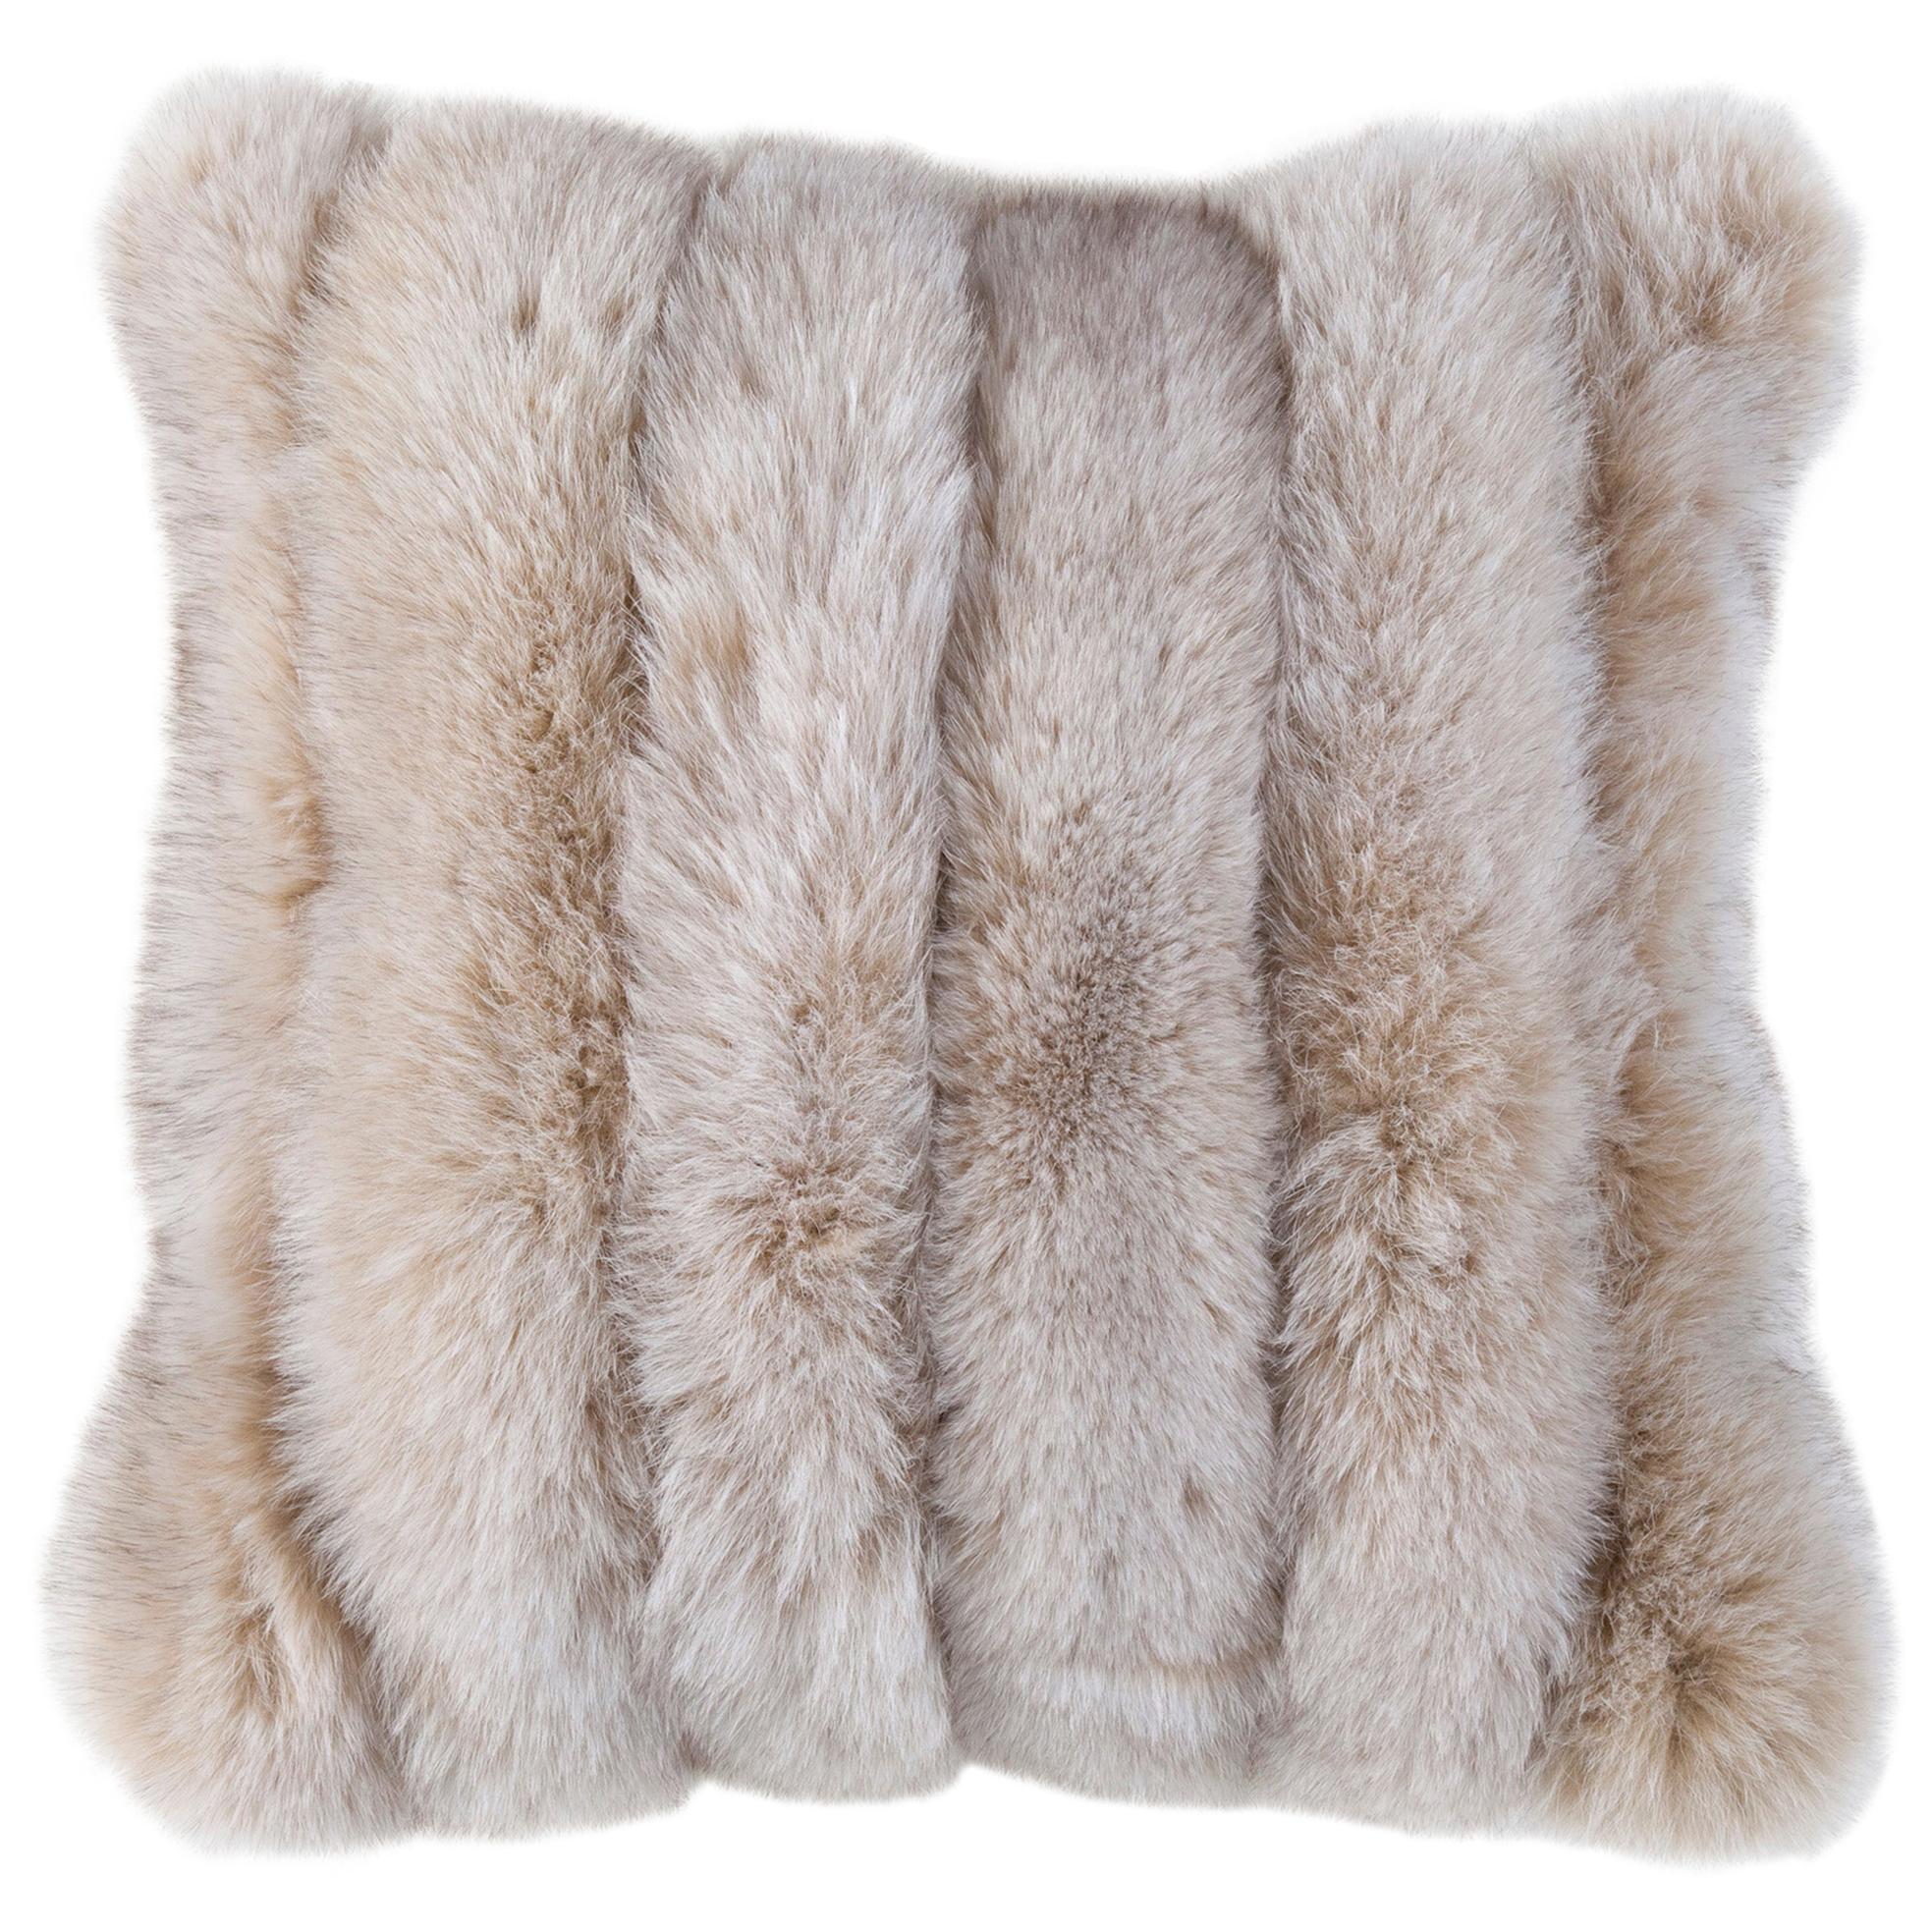 HOLLY HUNT Fox Strip Pillow in Light Stone with Cotton Velvet by Adri Collection